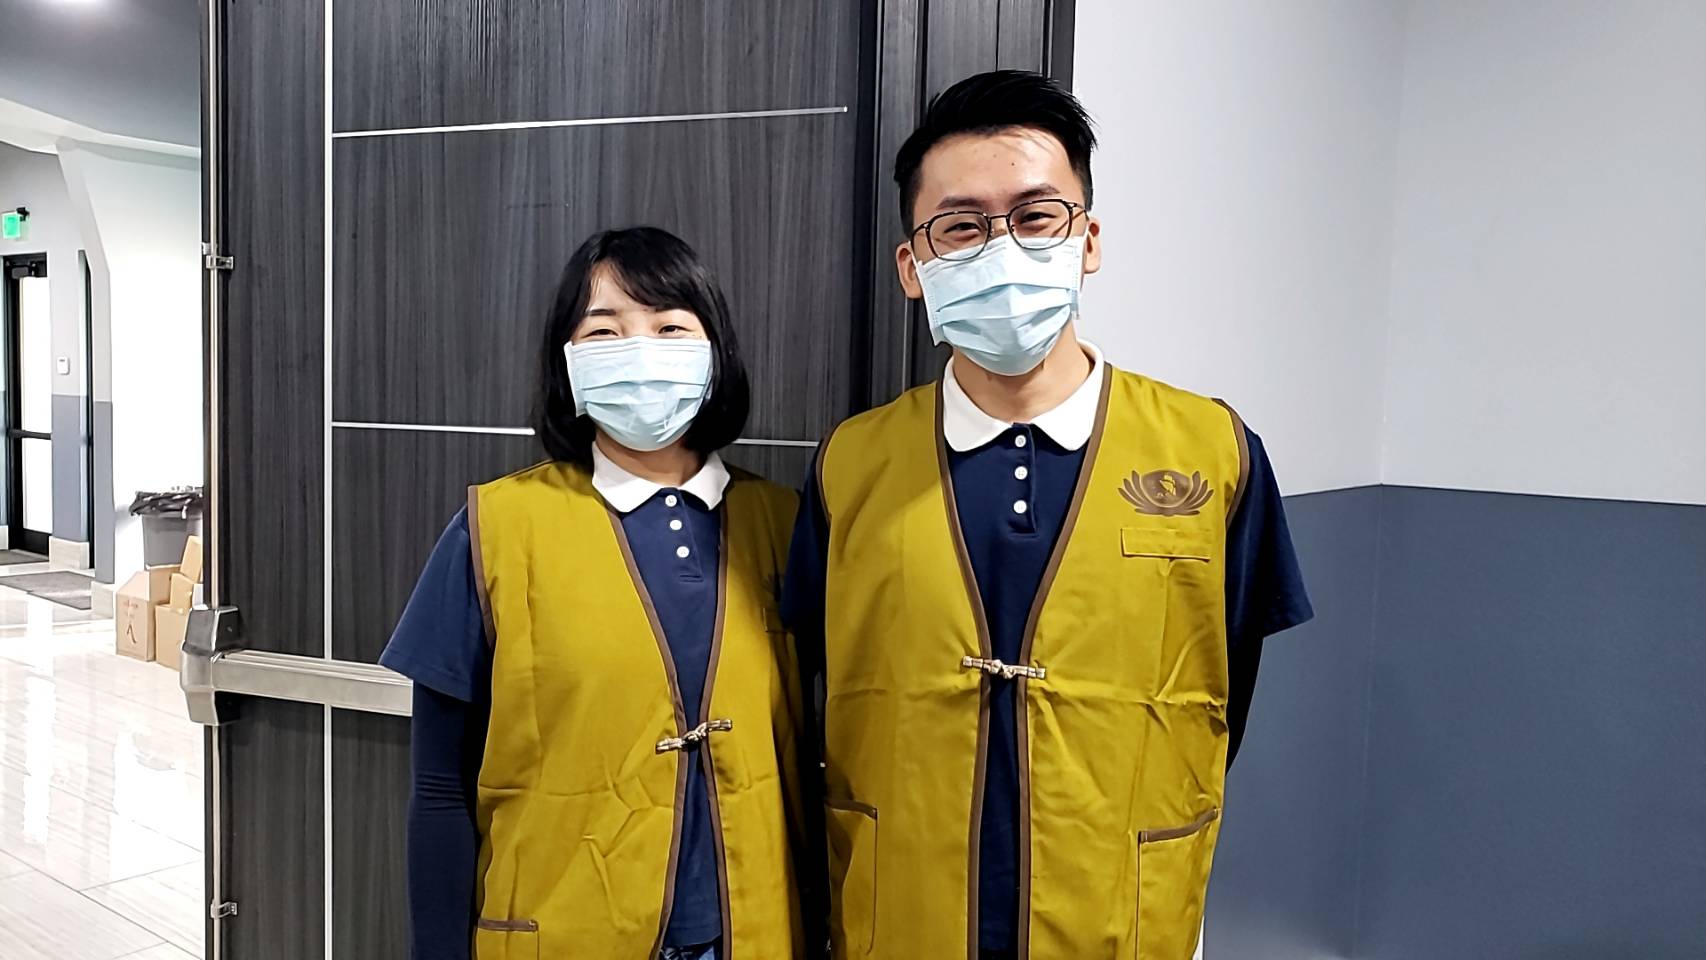 Yaci Li and Zhi’an Shi came to Florida to offer their care in overseas disaster relief for the first time